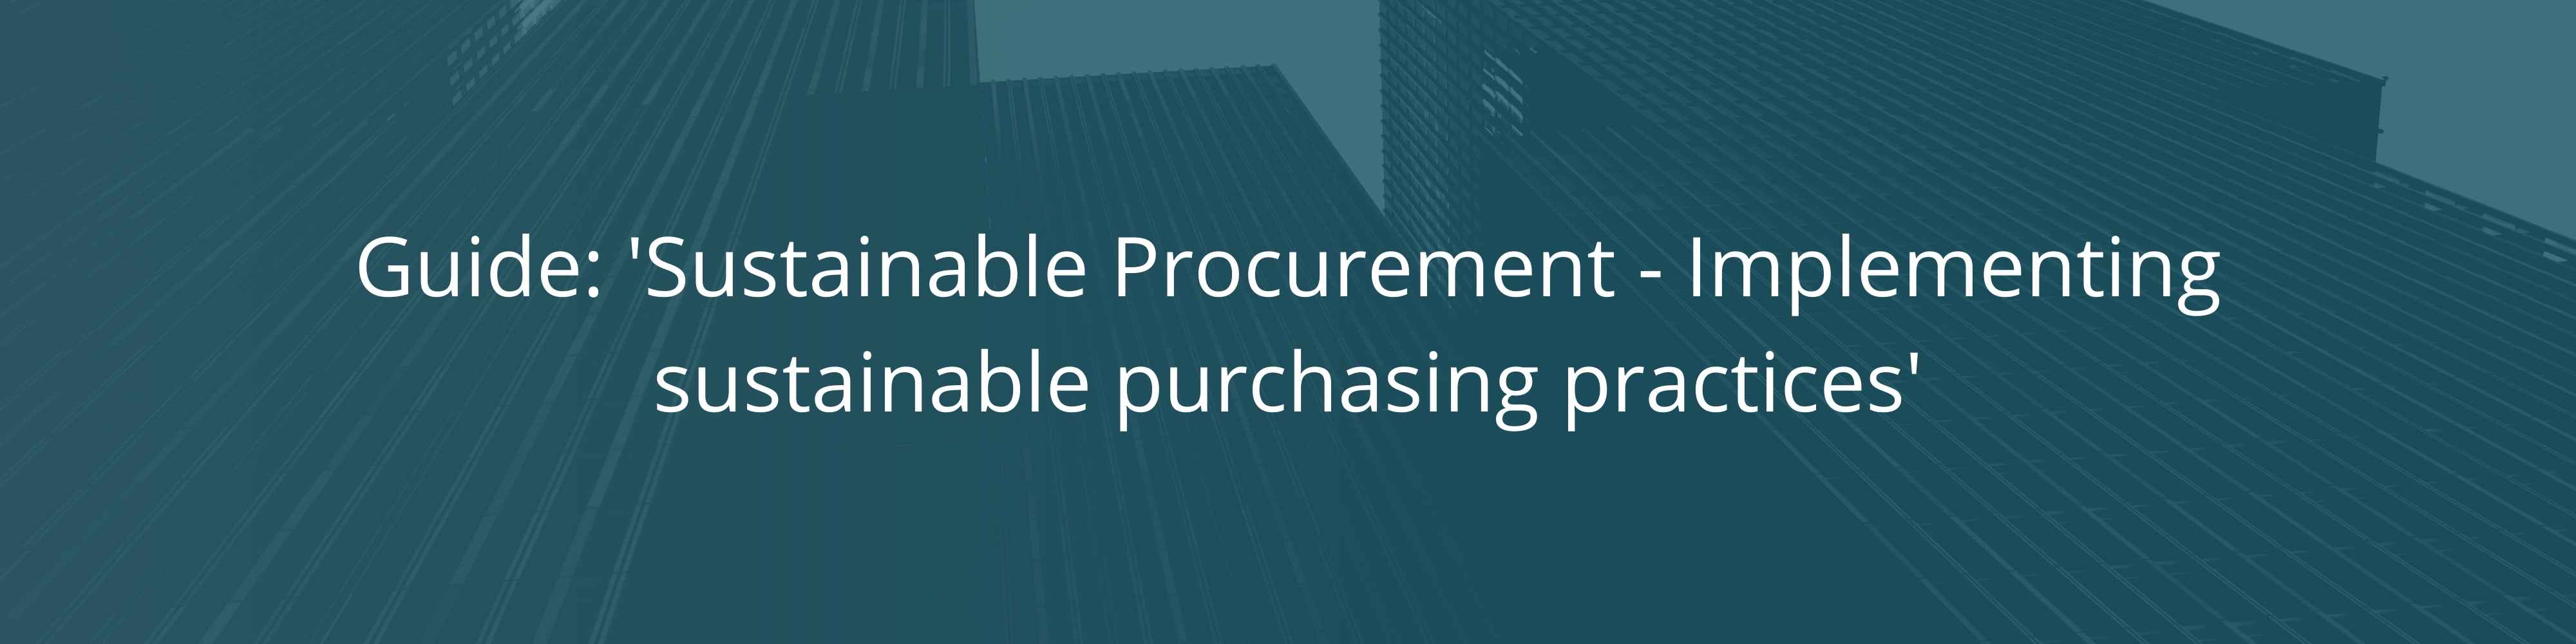 Sustainable-Procurement Guidefortypage